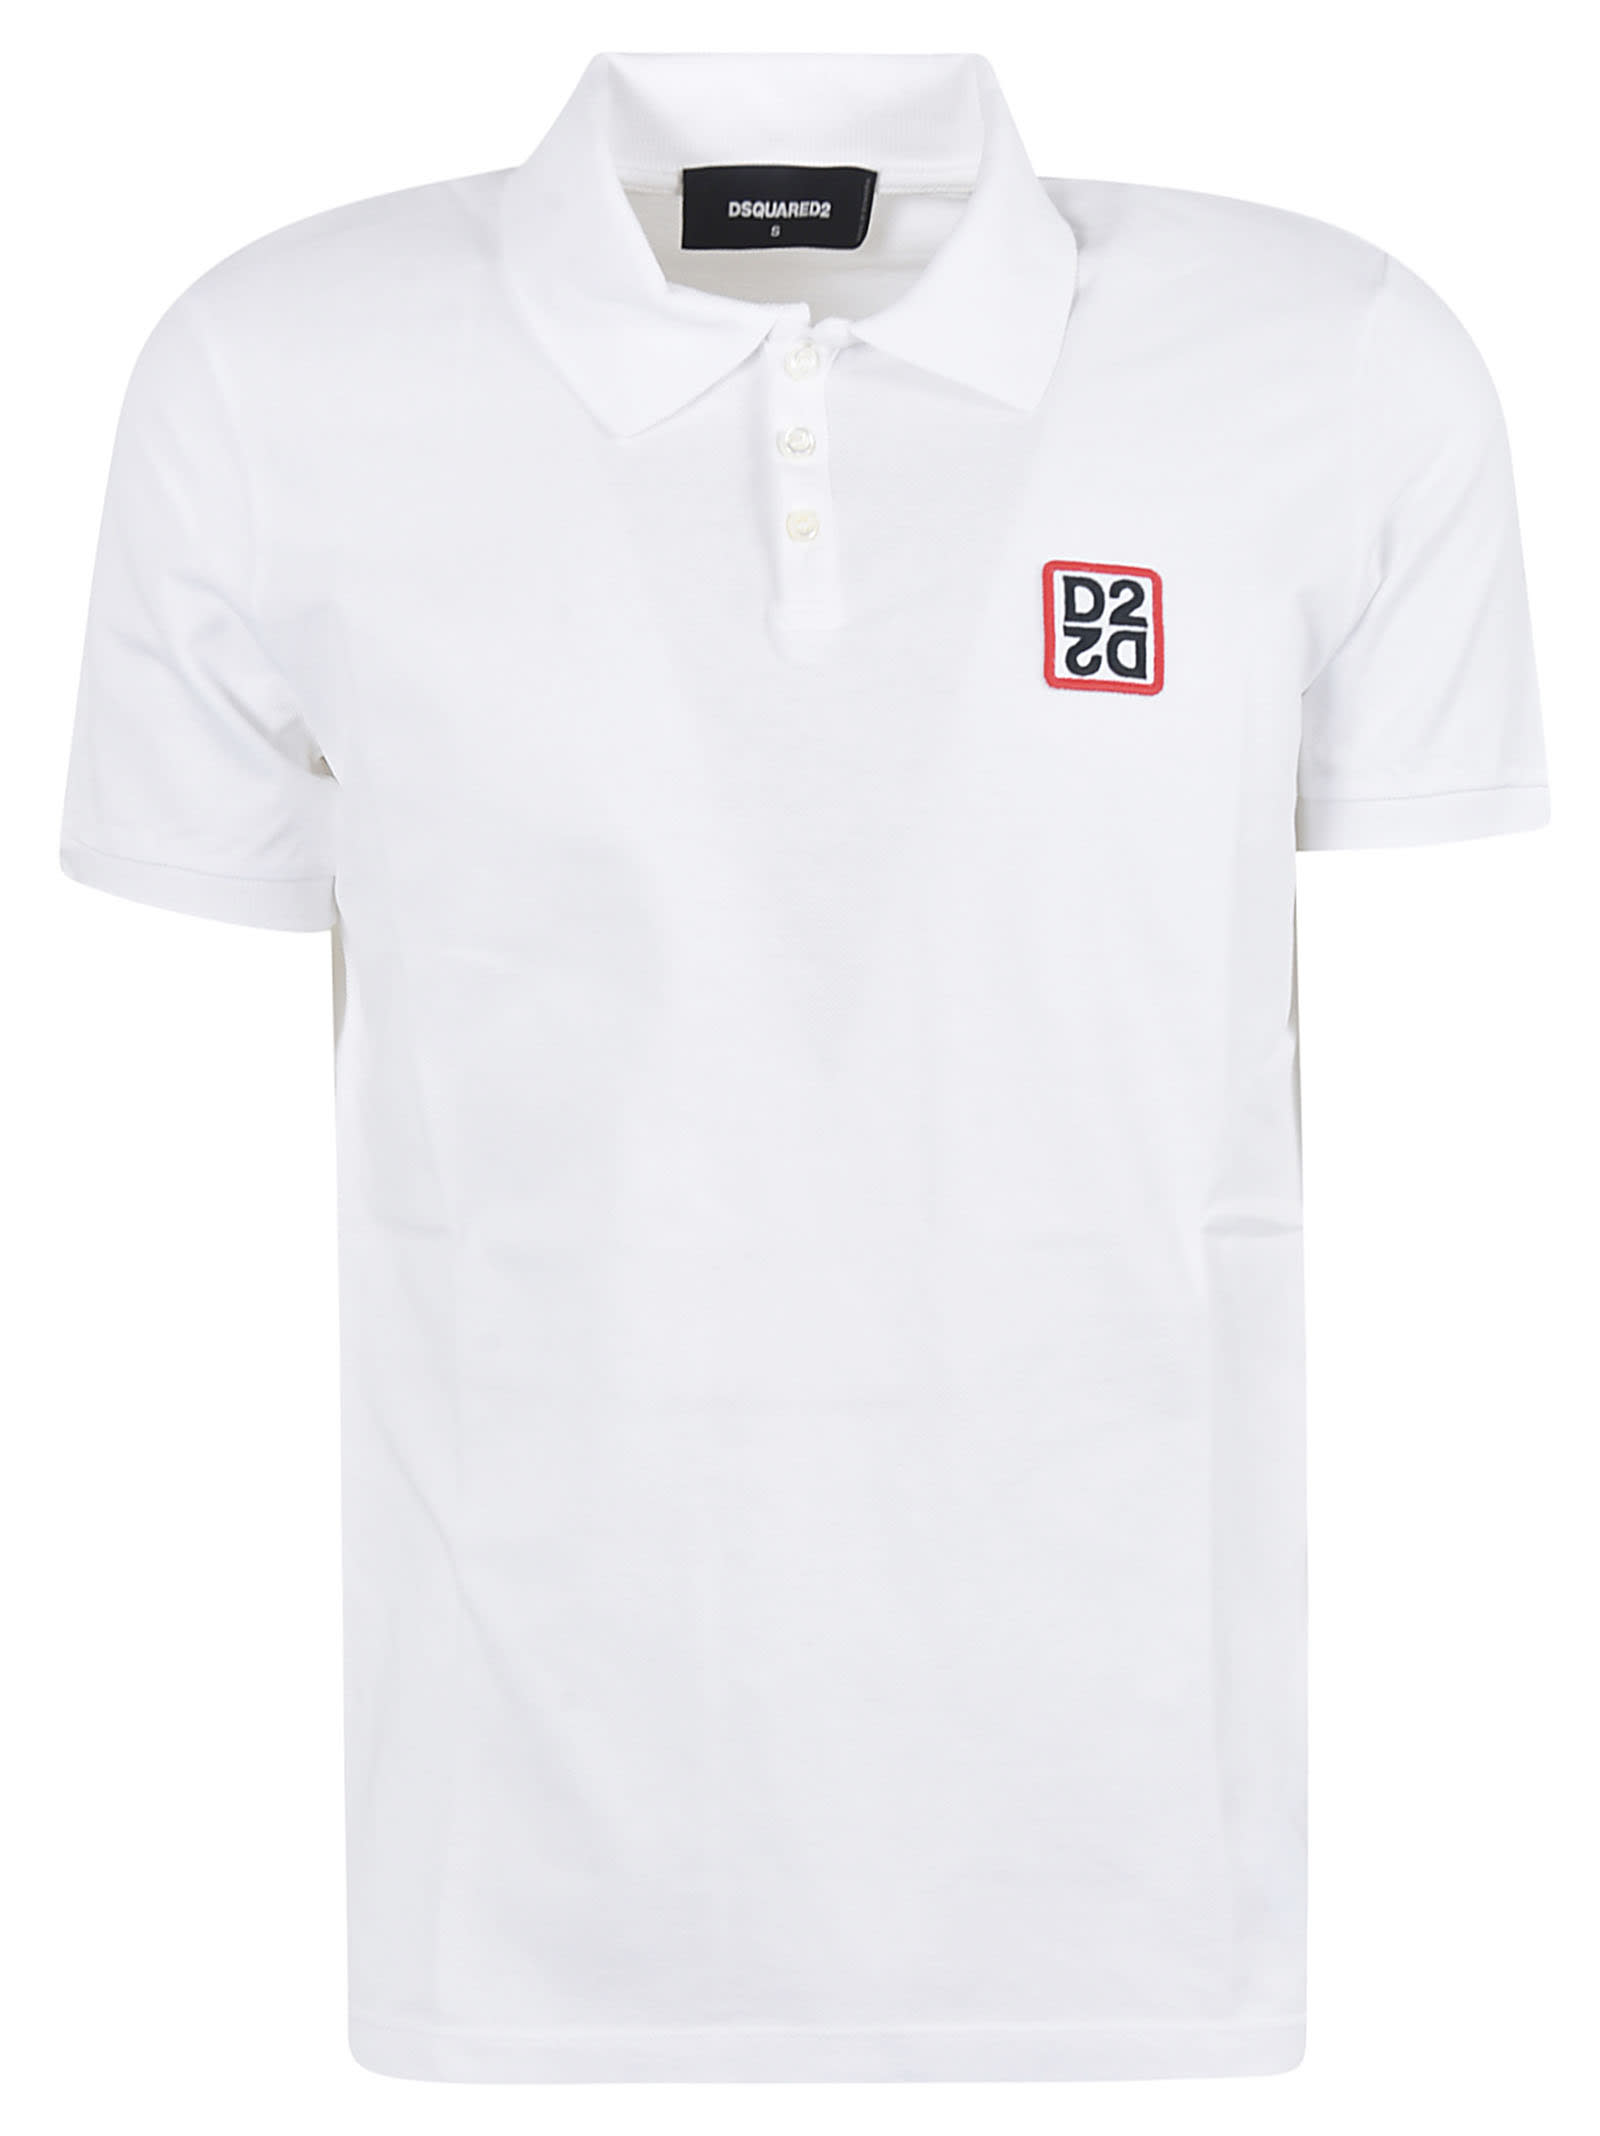 DSQUARED2 LOGO PATCHED POLO SHIRT,11241050